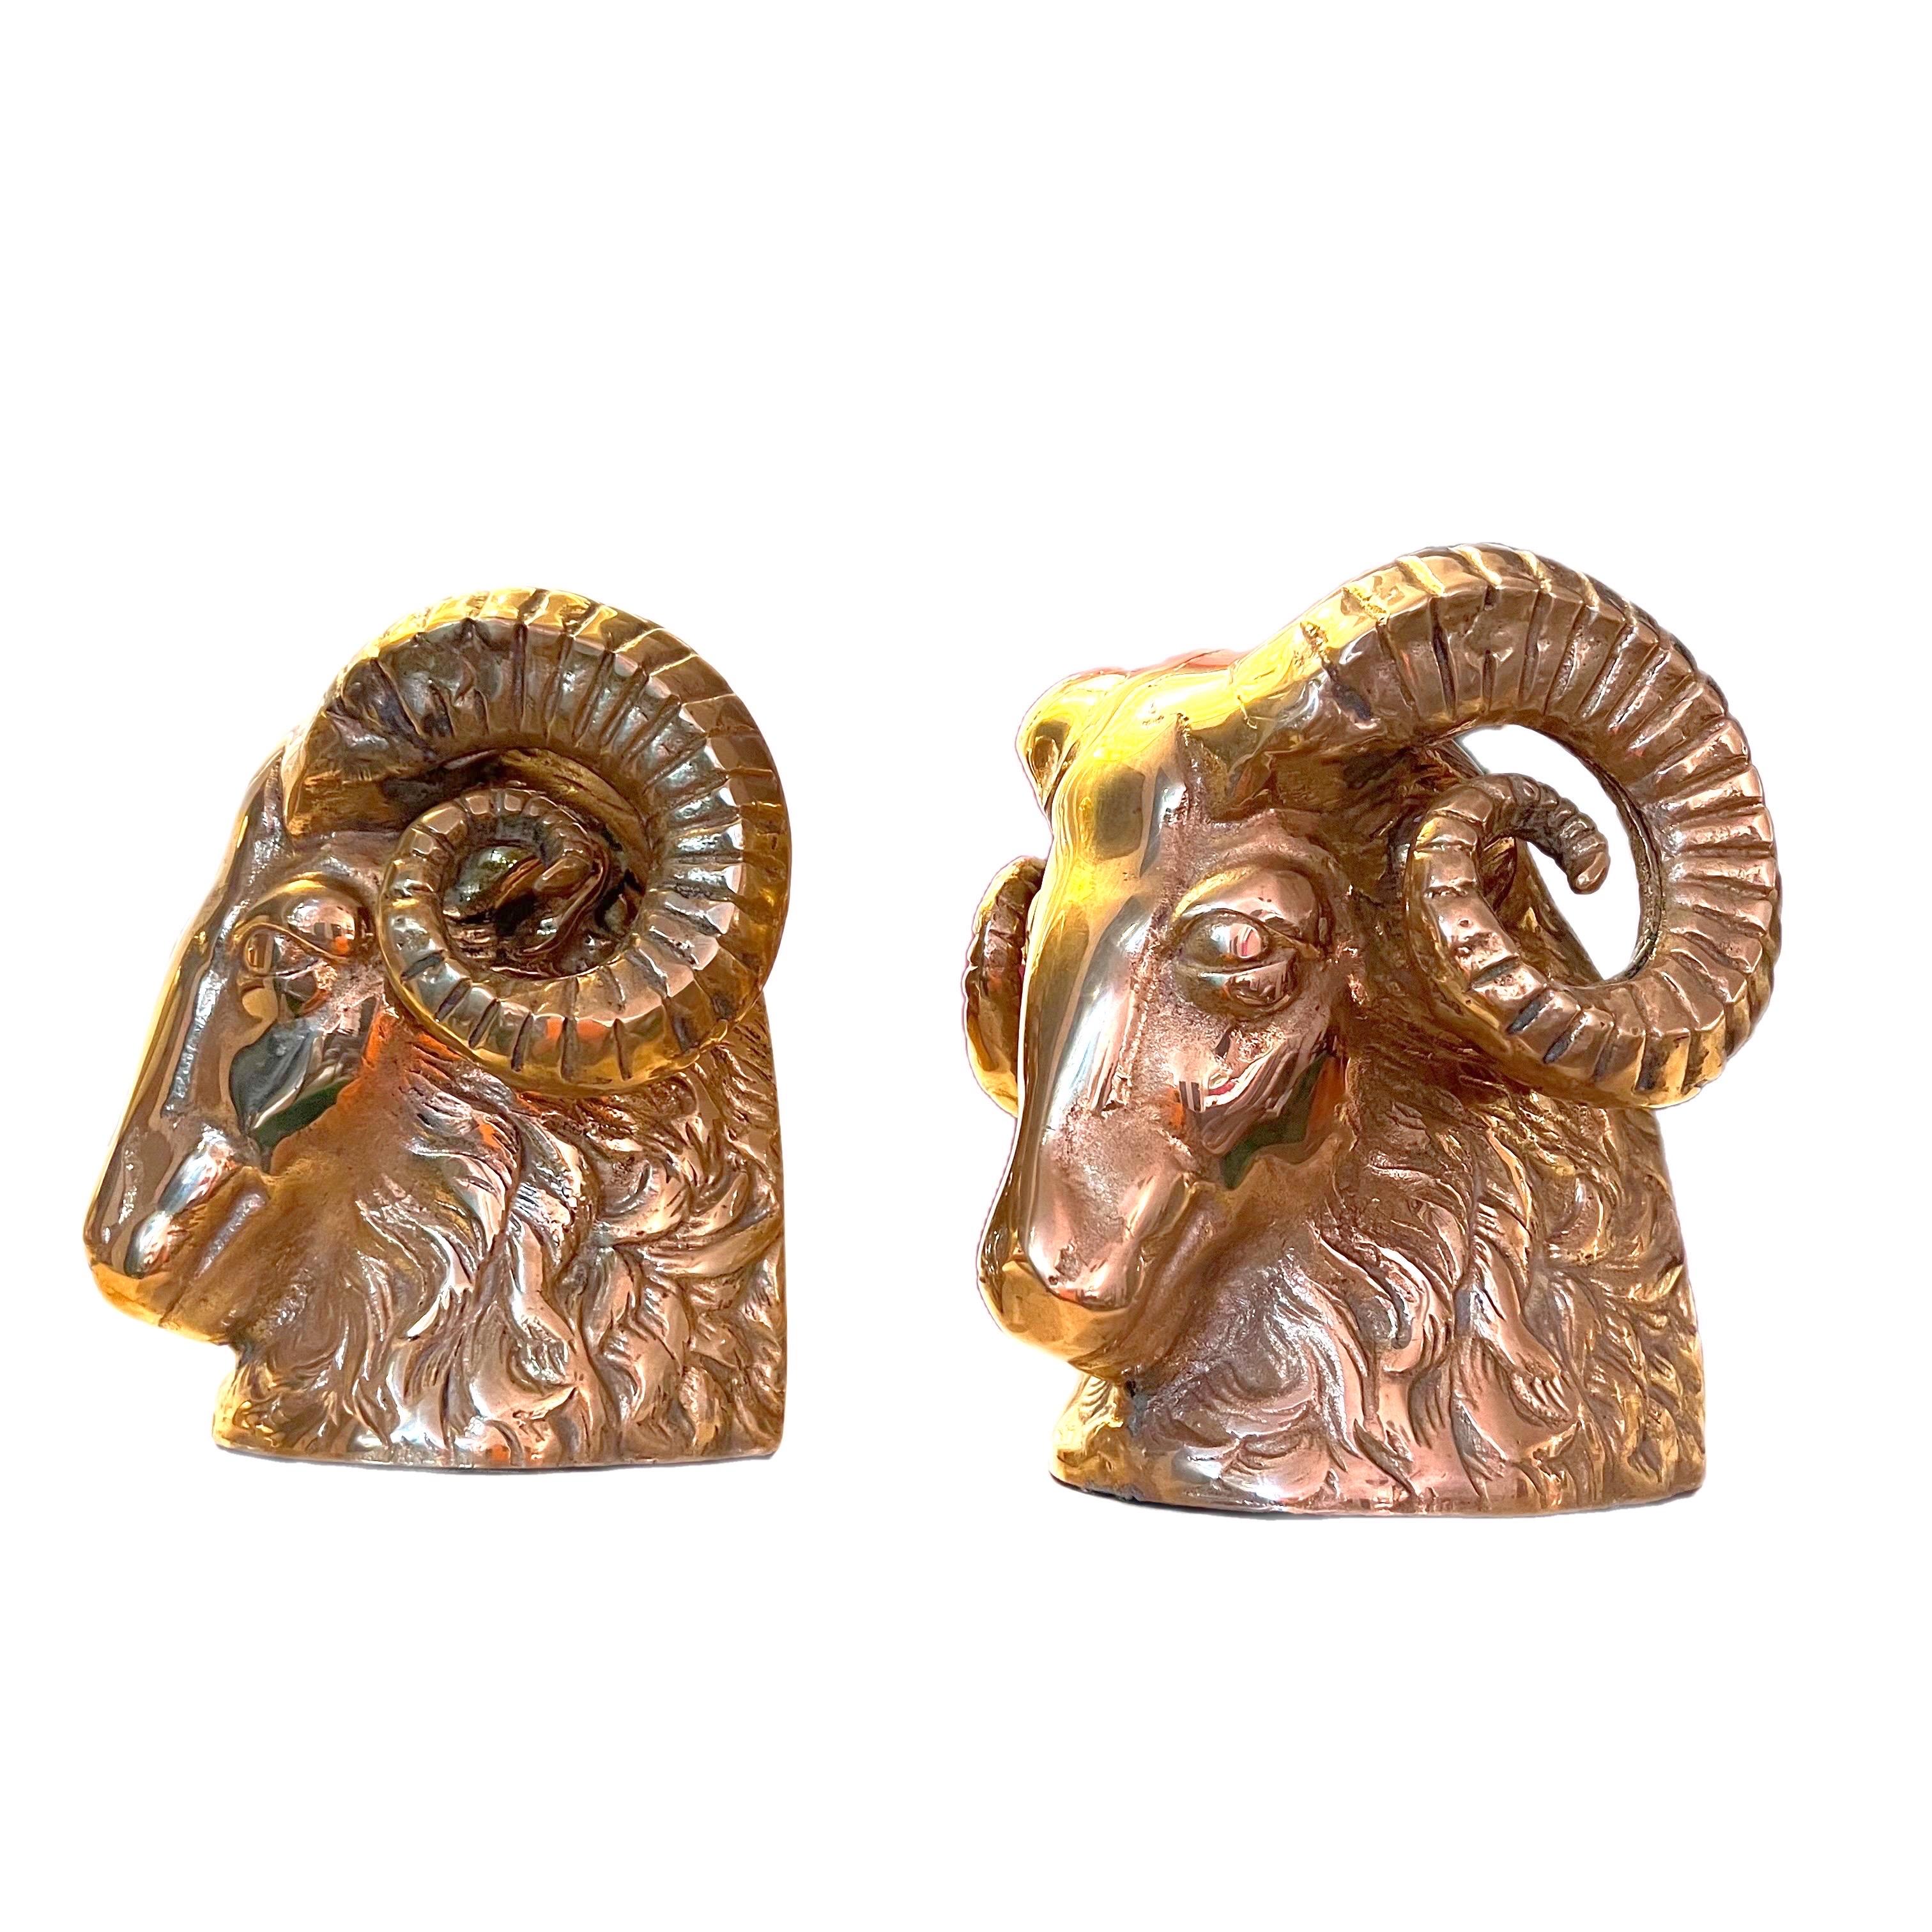 Vintage Brass Big Horn Ram Bookends, a Pair For Sale 1